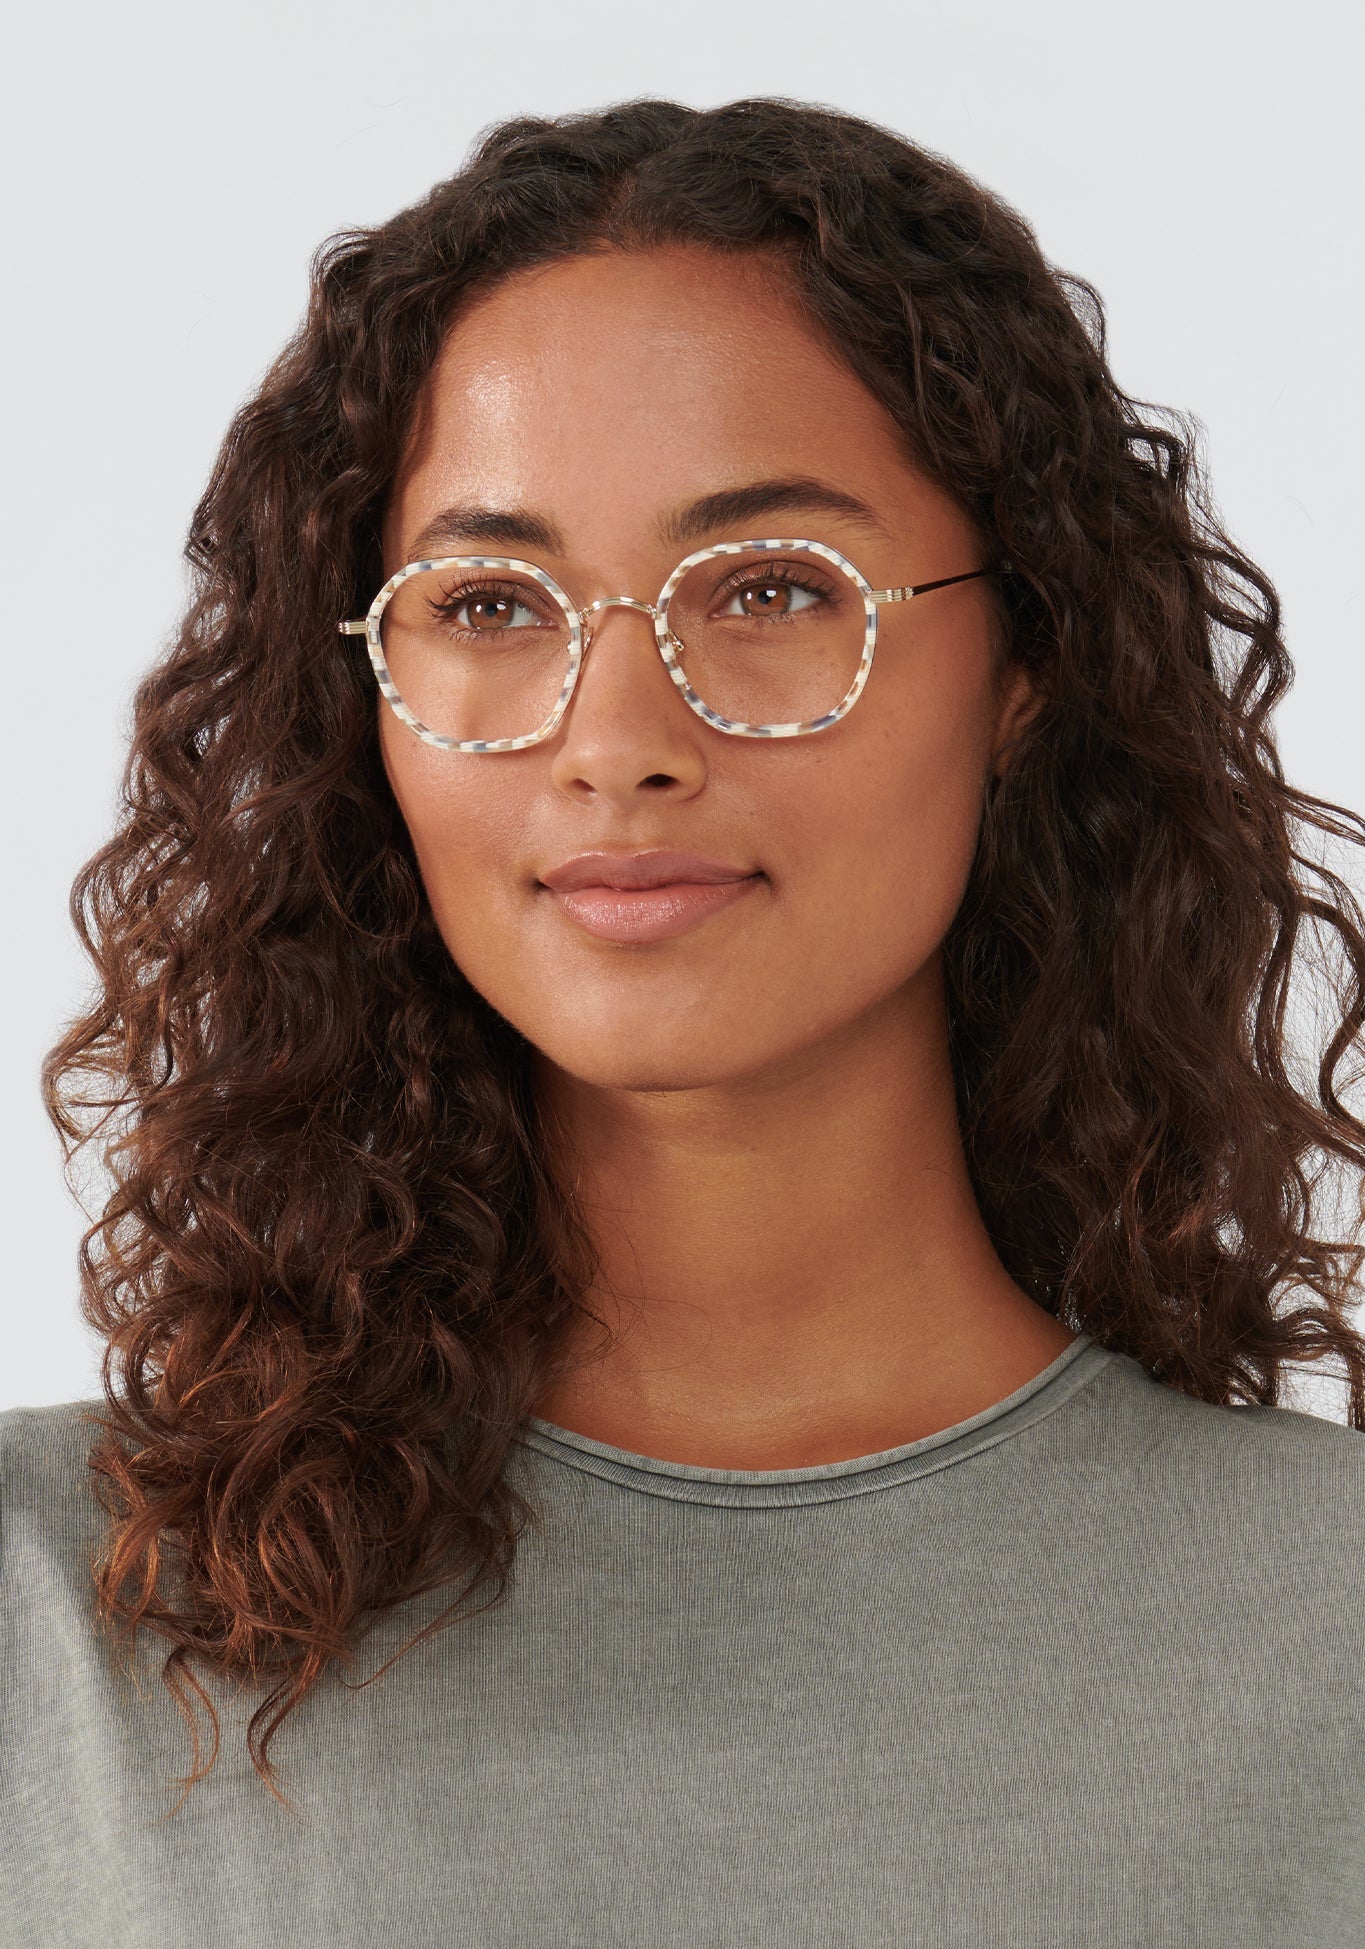 KREWE - LEIGHTON | 12K Titanium + Pincheck handcrafted, luxury blue and white checkered octaginal eyeglasses with 12k gold plated metal hardware womens model | Model: Meli